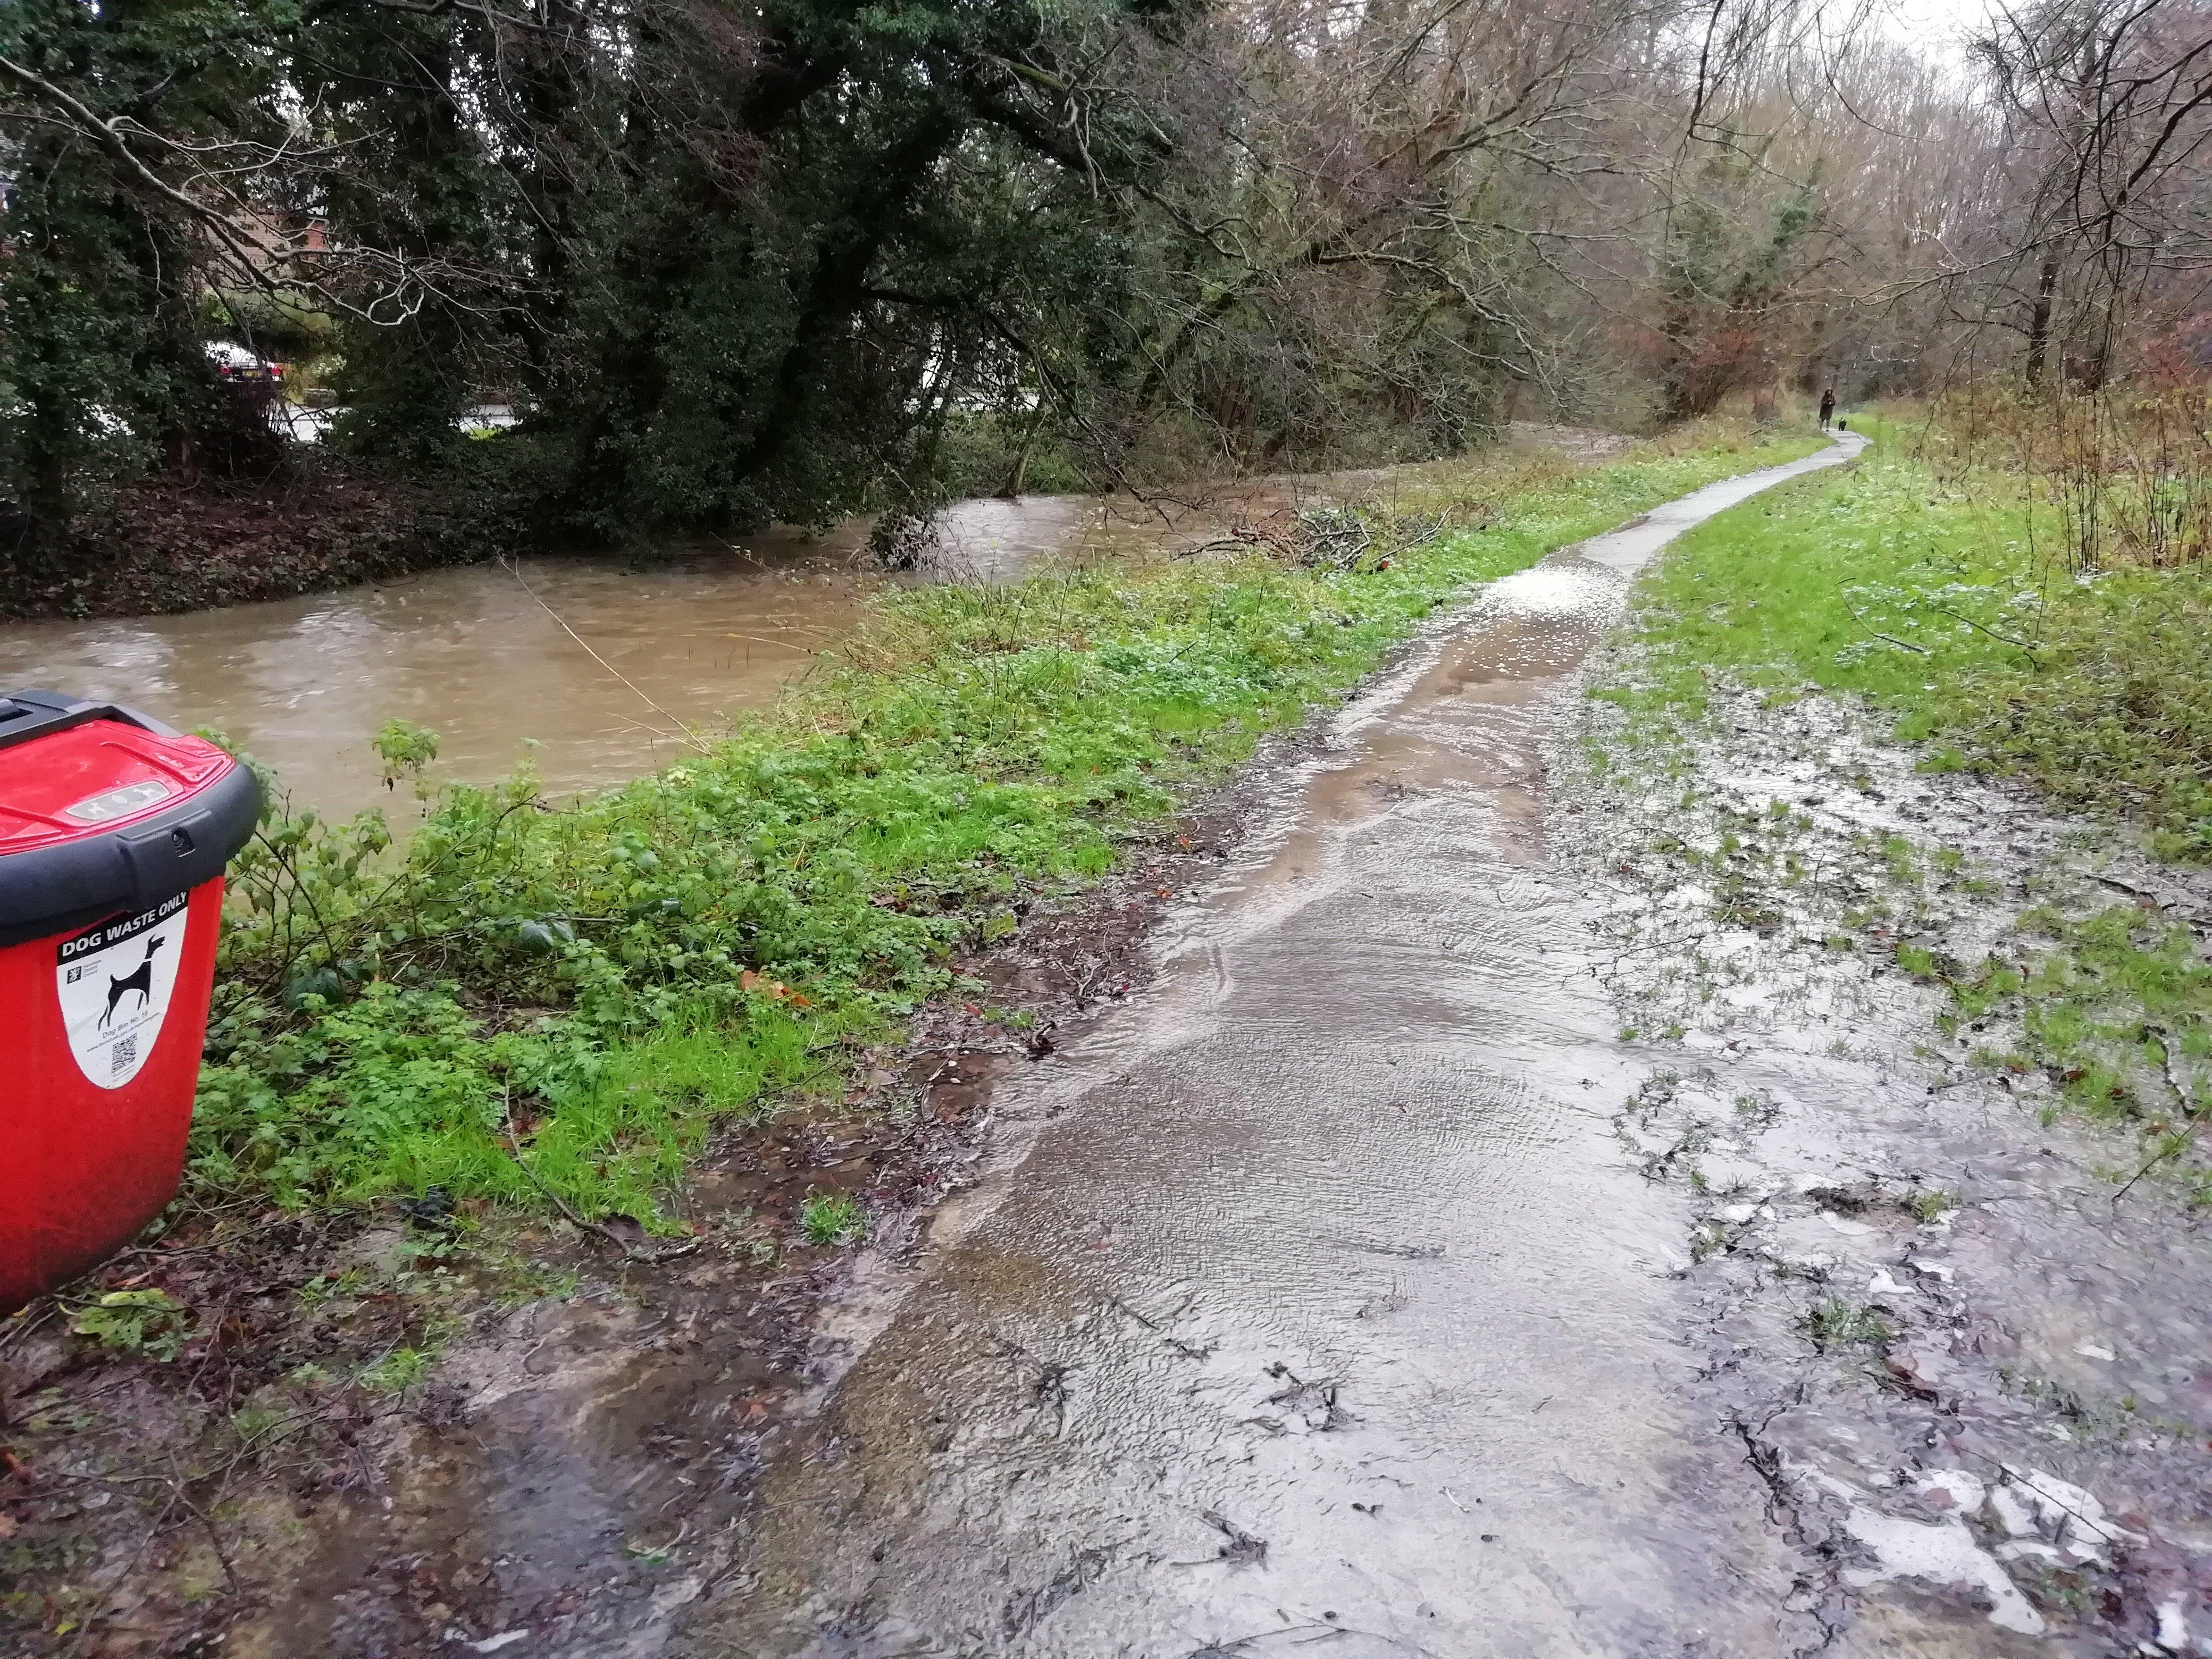 Several footpaths have been left like rivers as a result